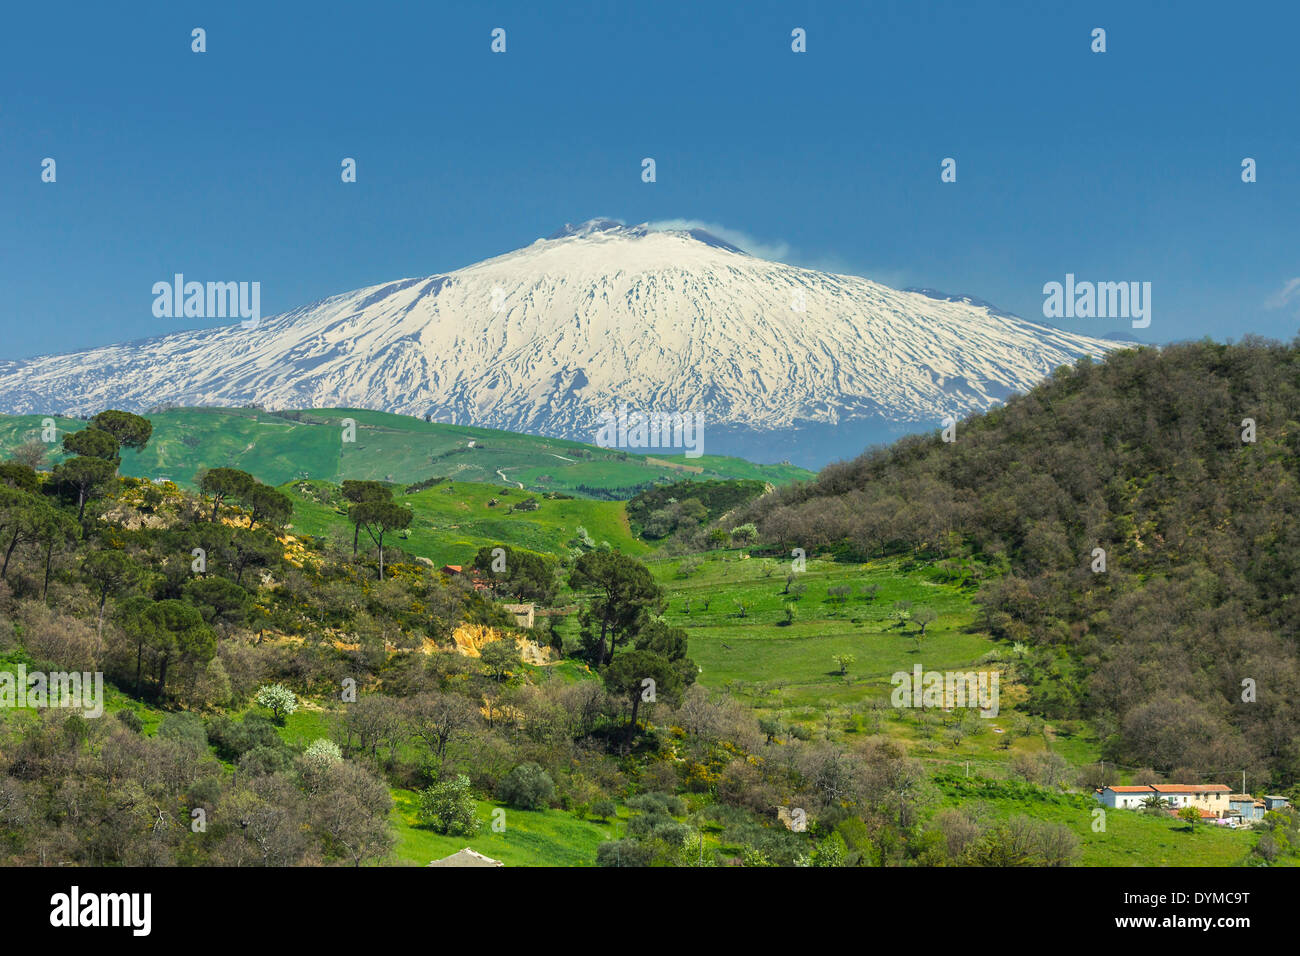 View to snow covered volcano Mount Etna in hill country near Nicosia in Spring; Nicosia, Enna Province, Sicily, Italy Stock Photo